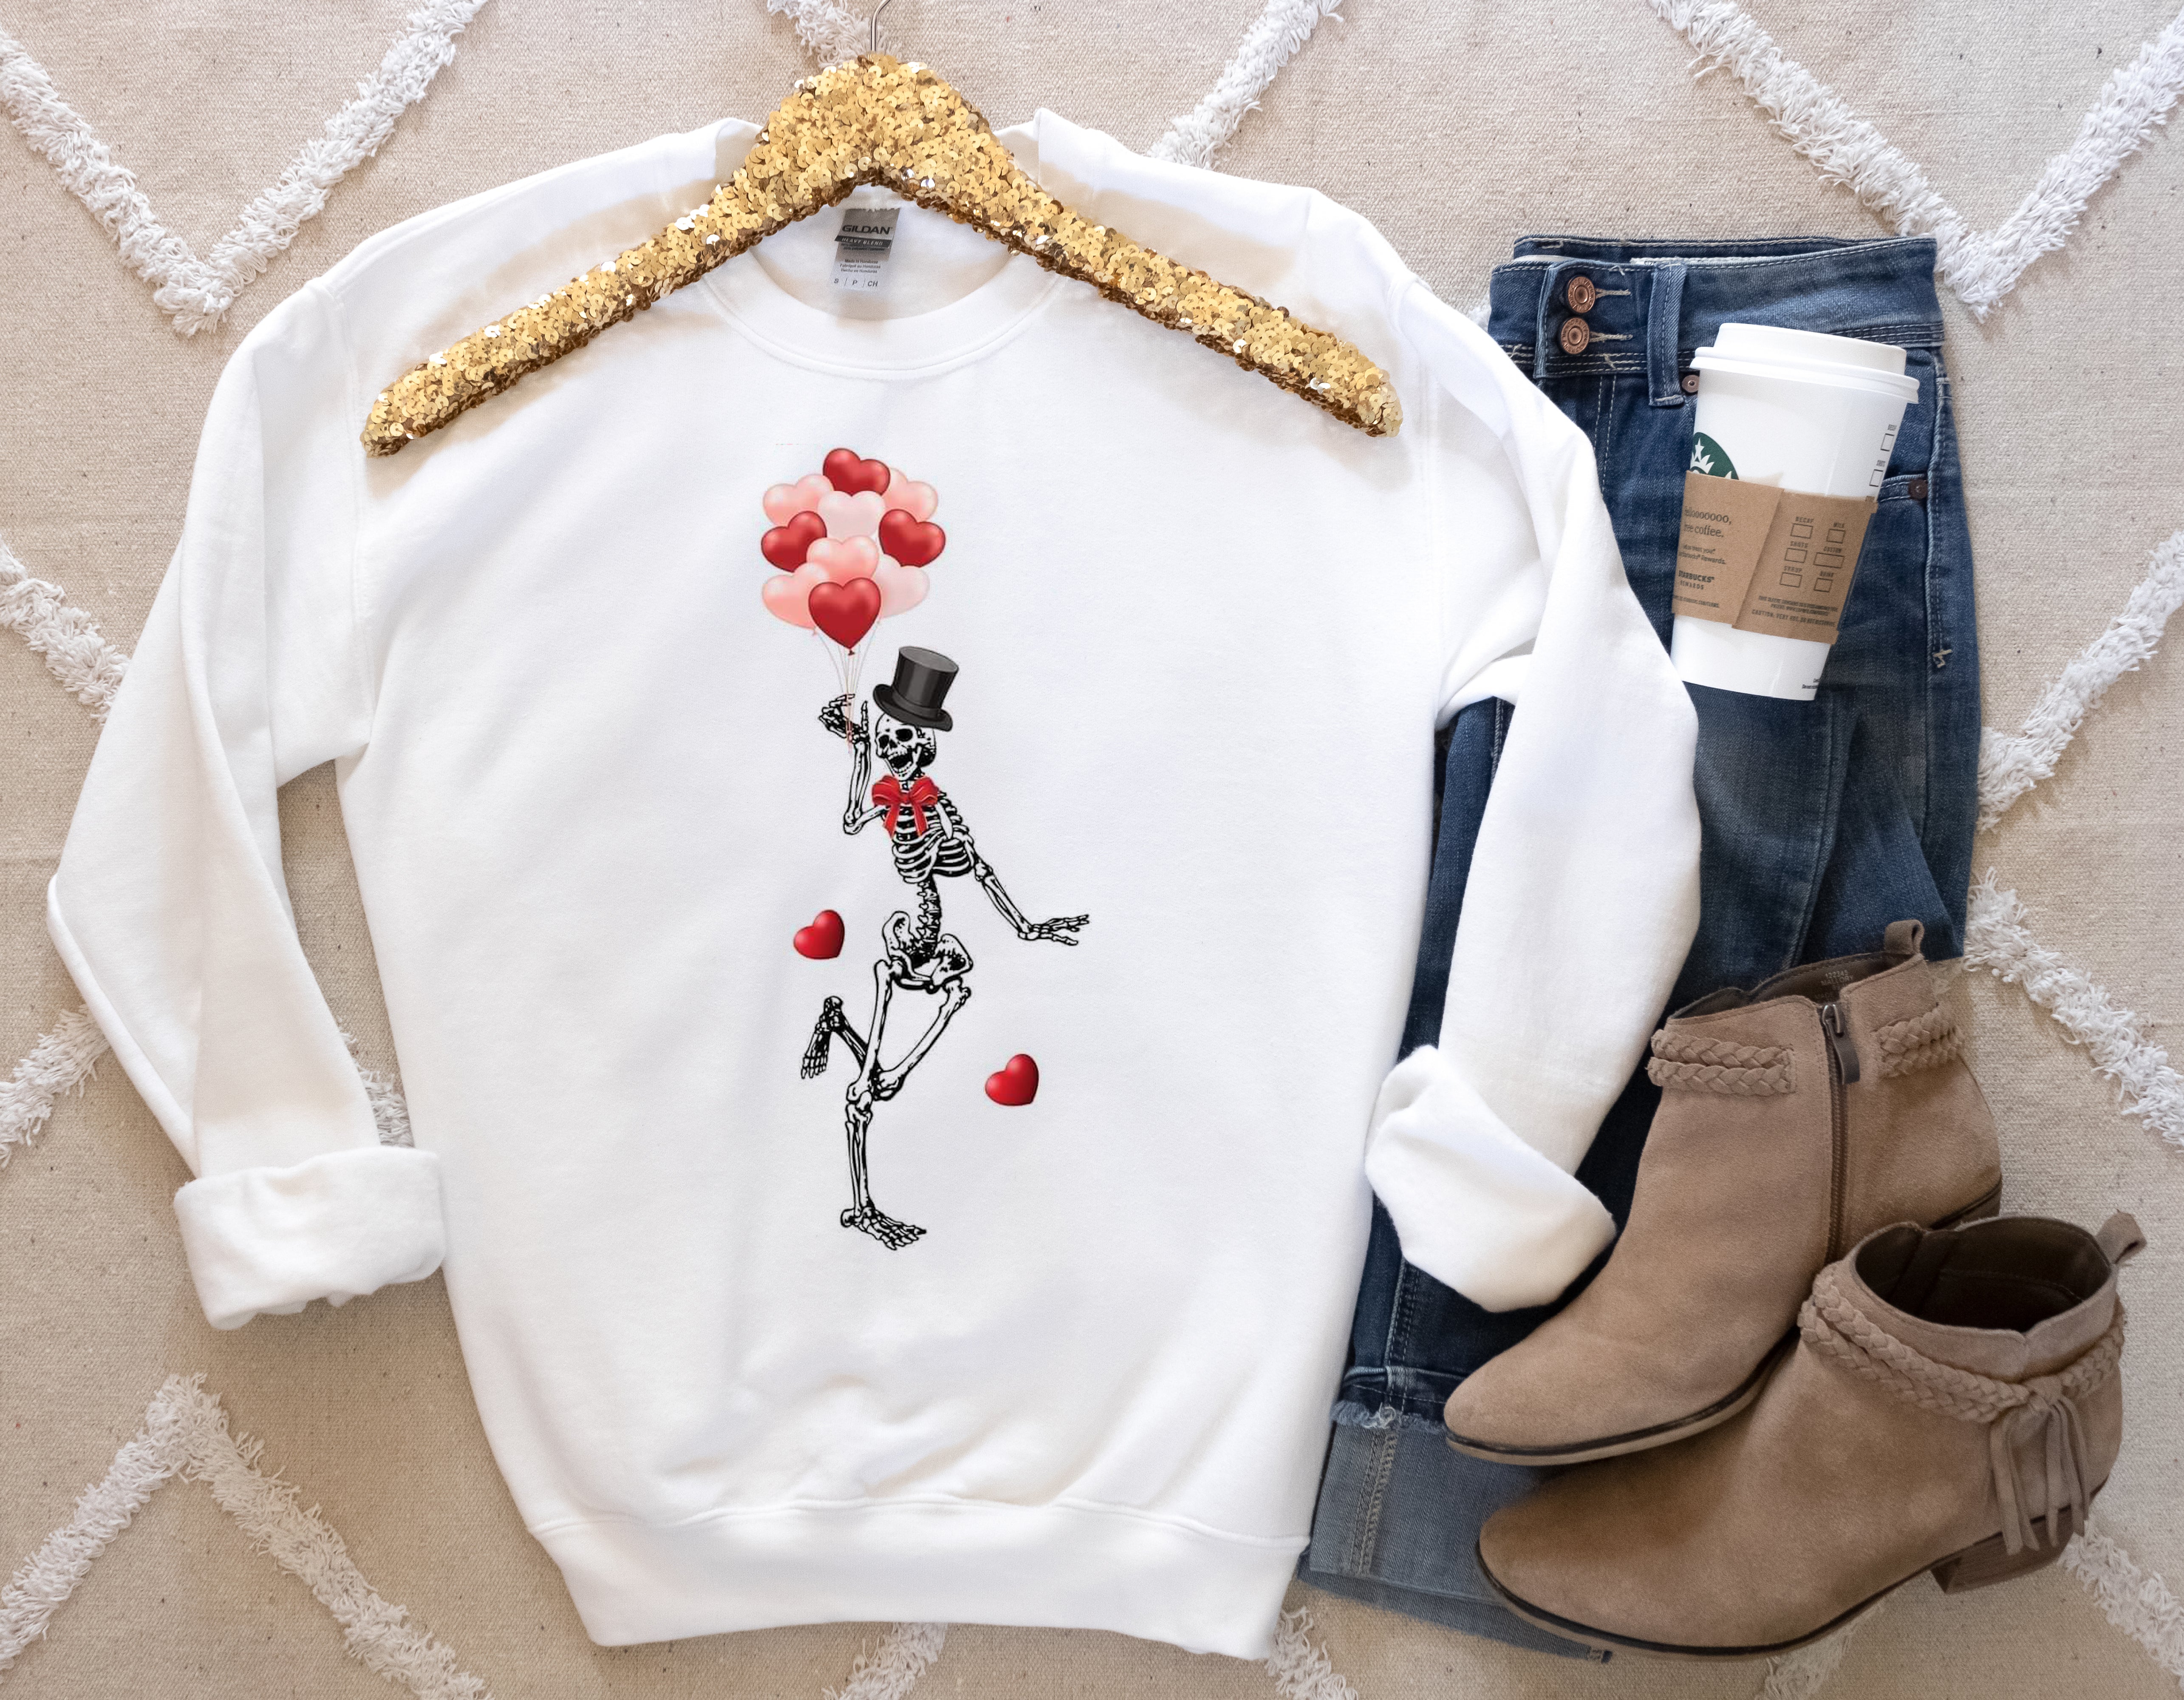 Dancing Skeleton with Balloons Valentine's Shirt